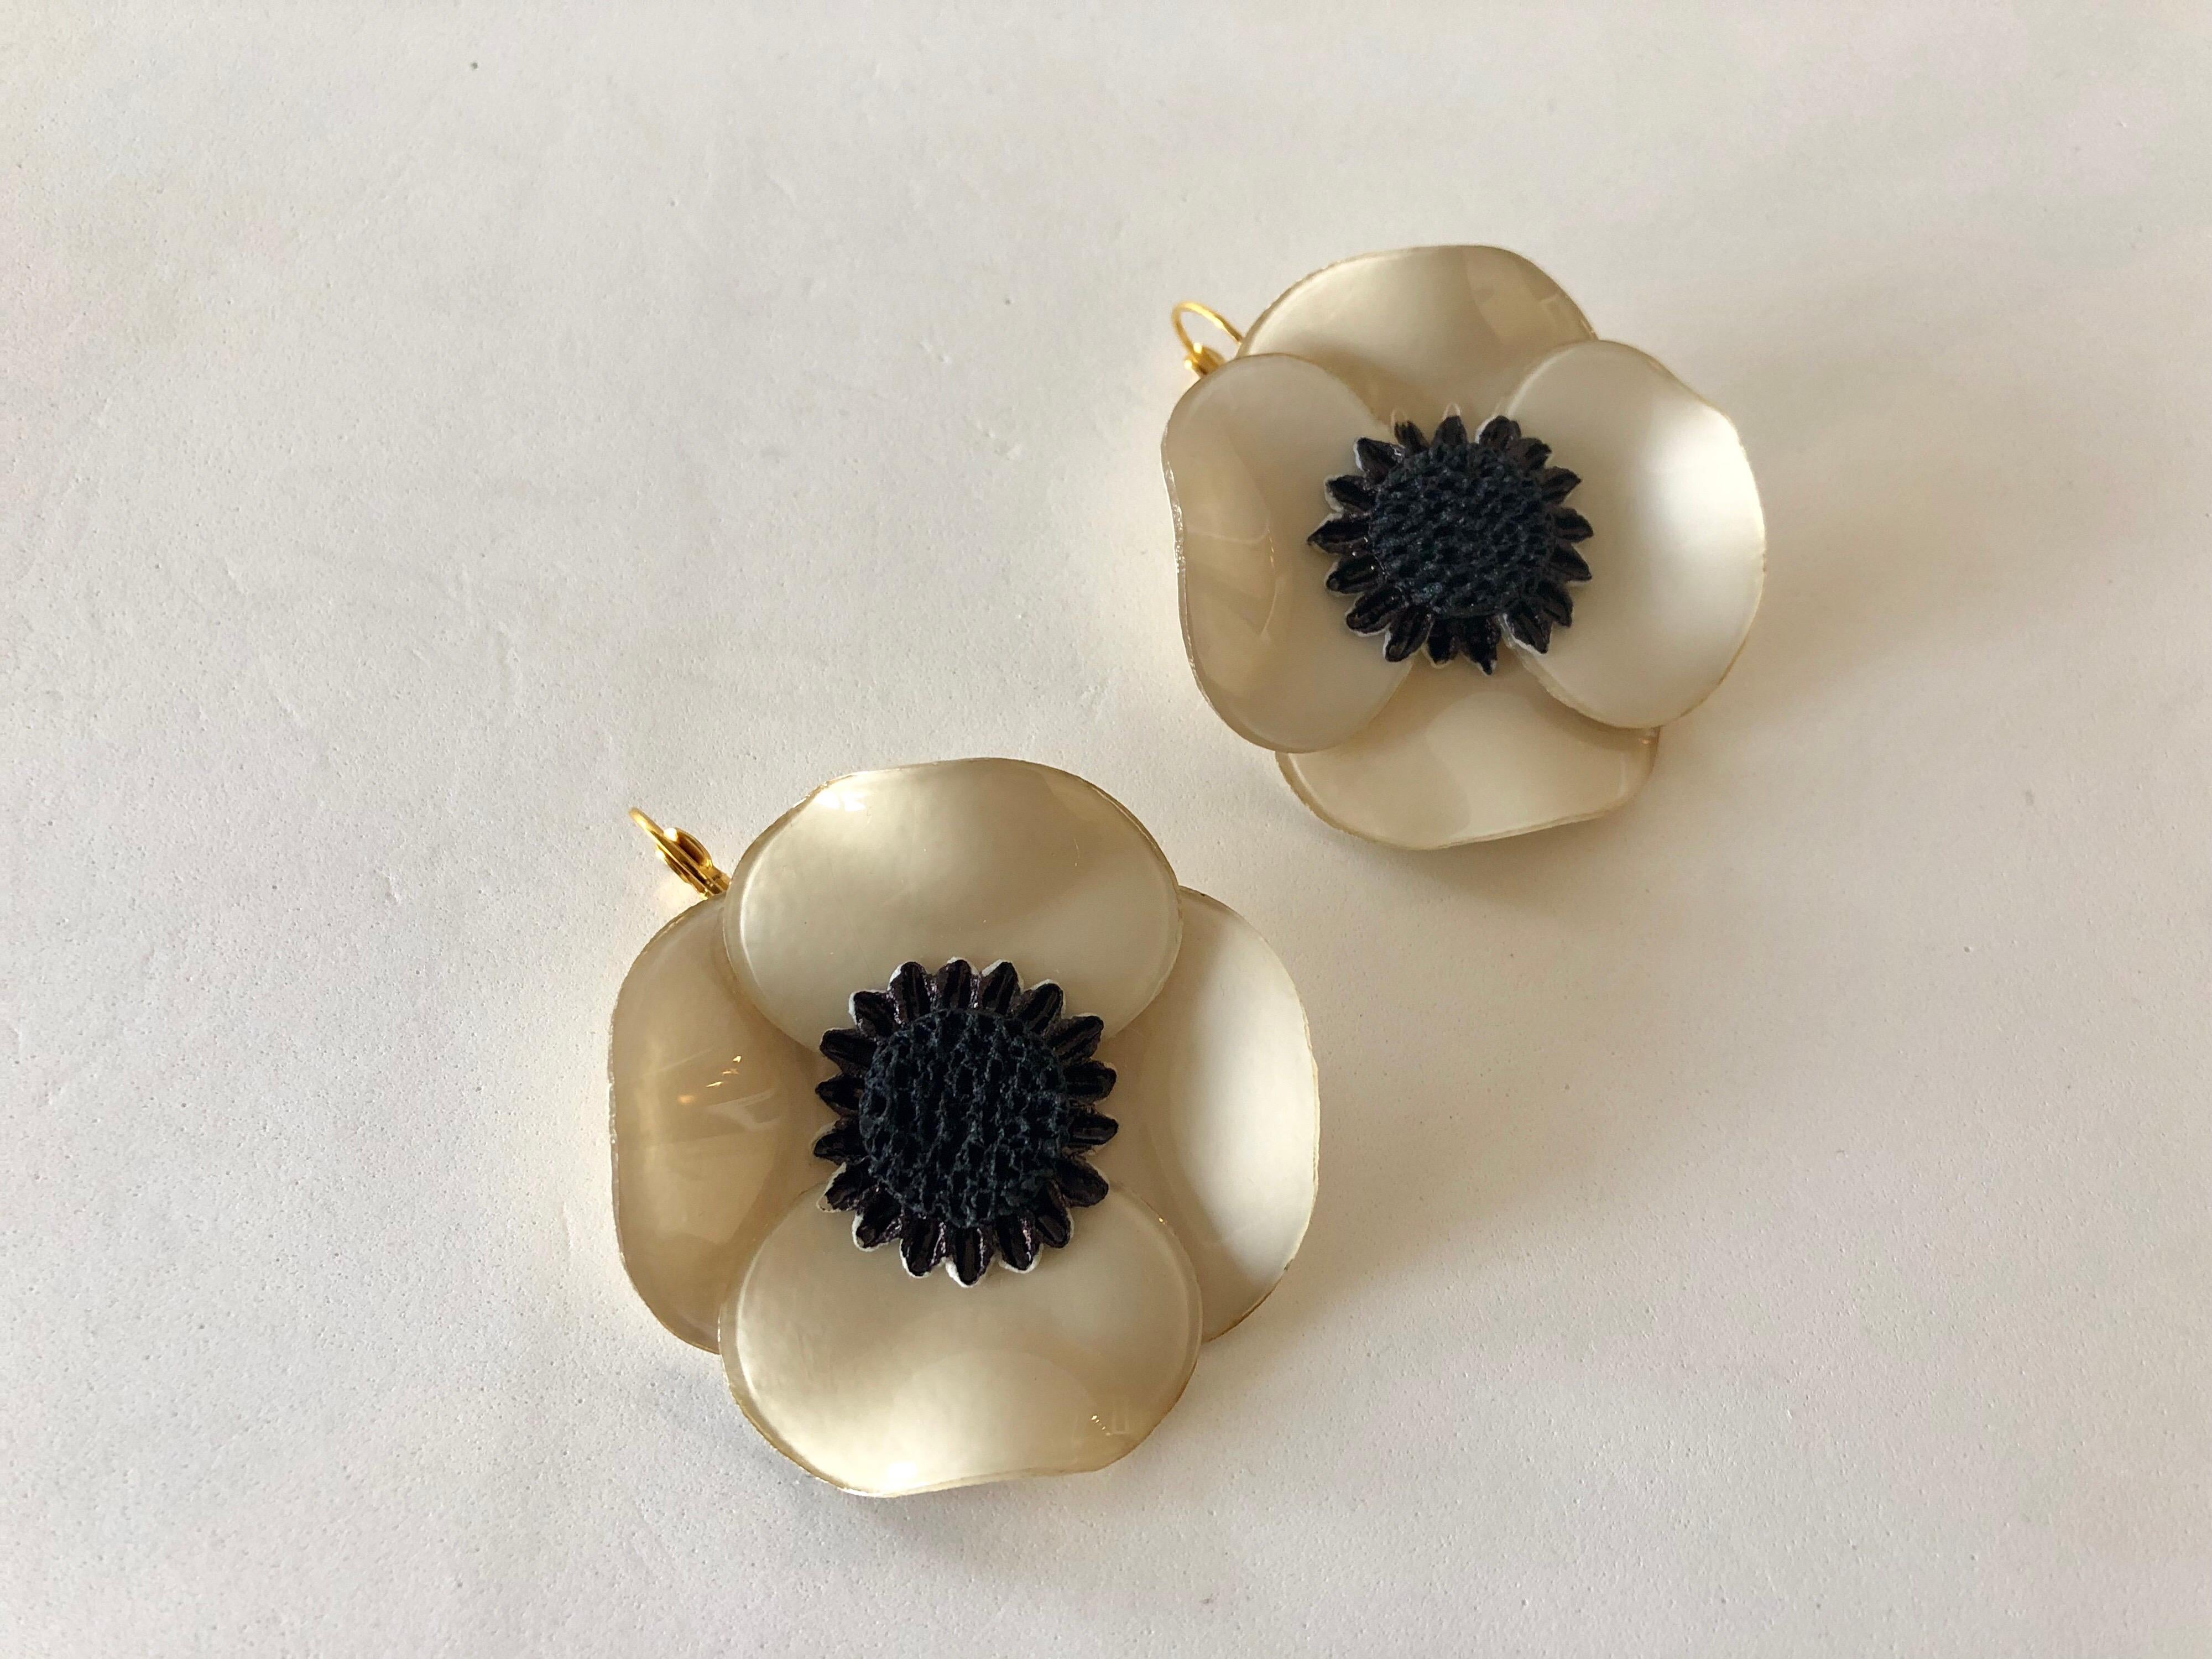 Light and easy to wear, these handmade artisanal pierced were made in Paris by Cilea. The lightweight earrings feature a single architectural enameline (enamel and resin composite) taupe poppy flower. The poppies are oversized and feature a black